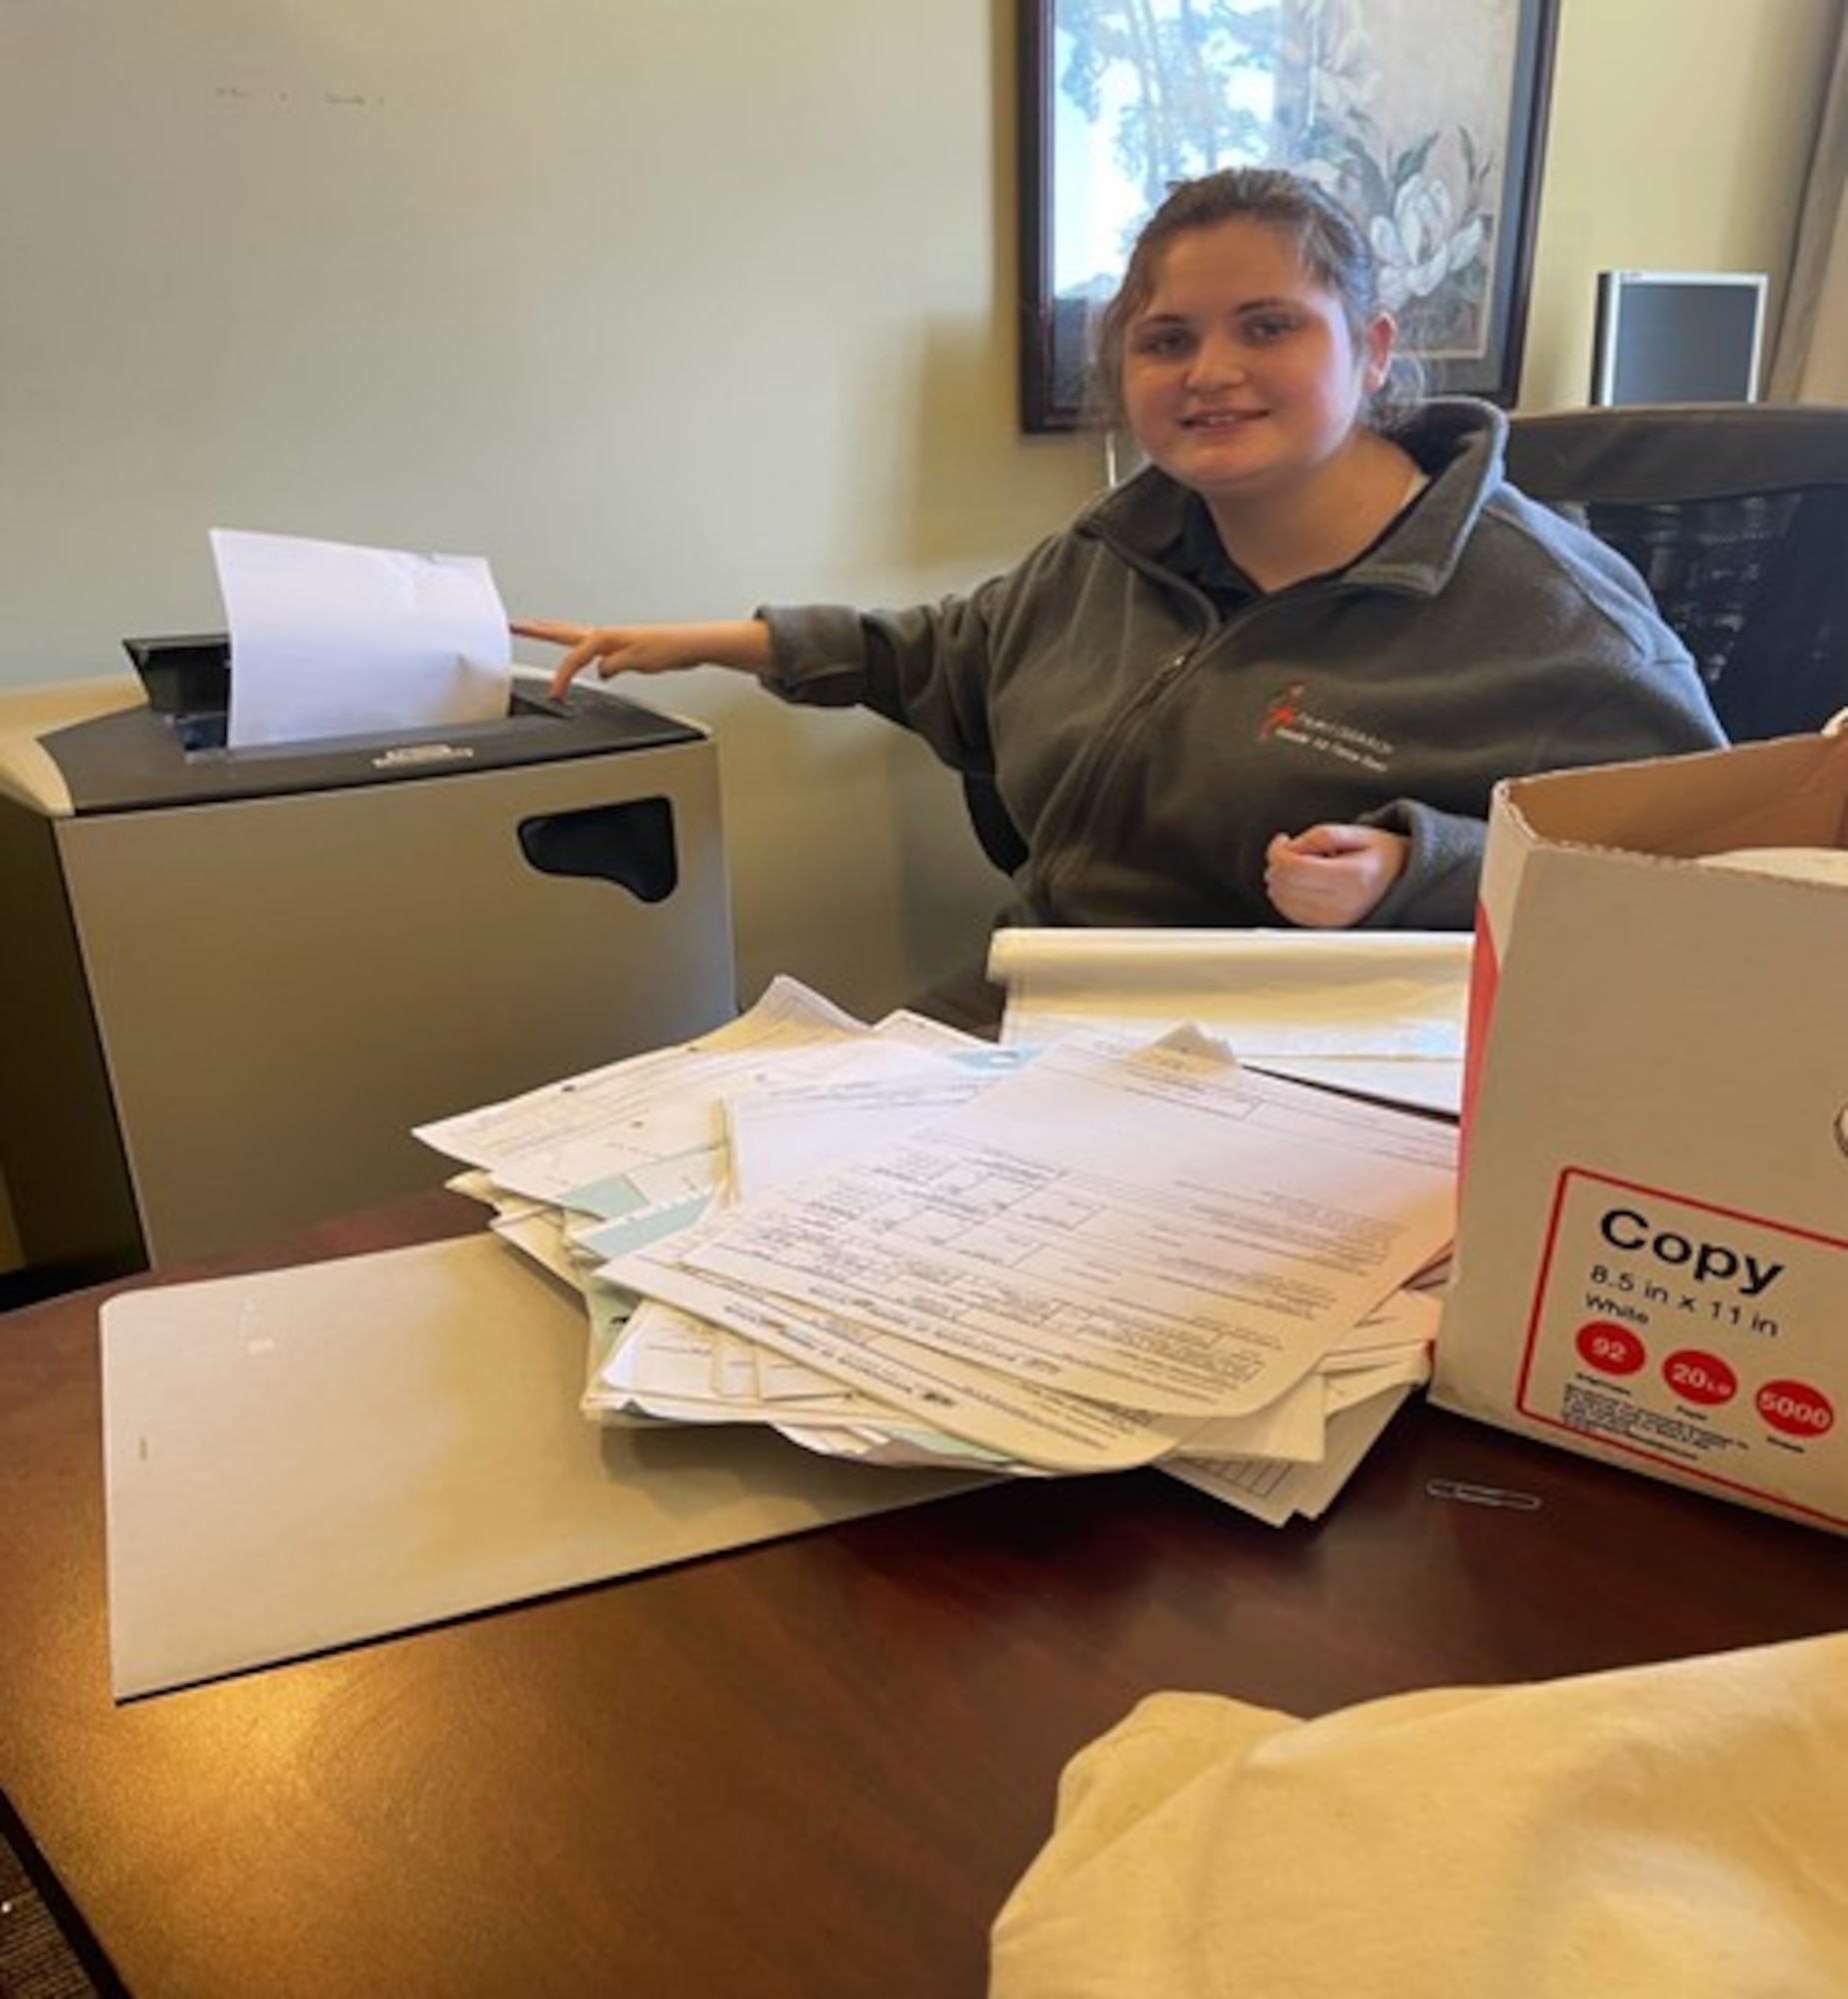 Courtesy photo of Candace Taylor, Project SEARCH intern, shredding paper at Tyer House while working with Keesler Air Force Base Lodging.